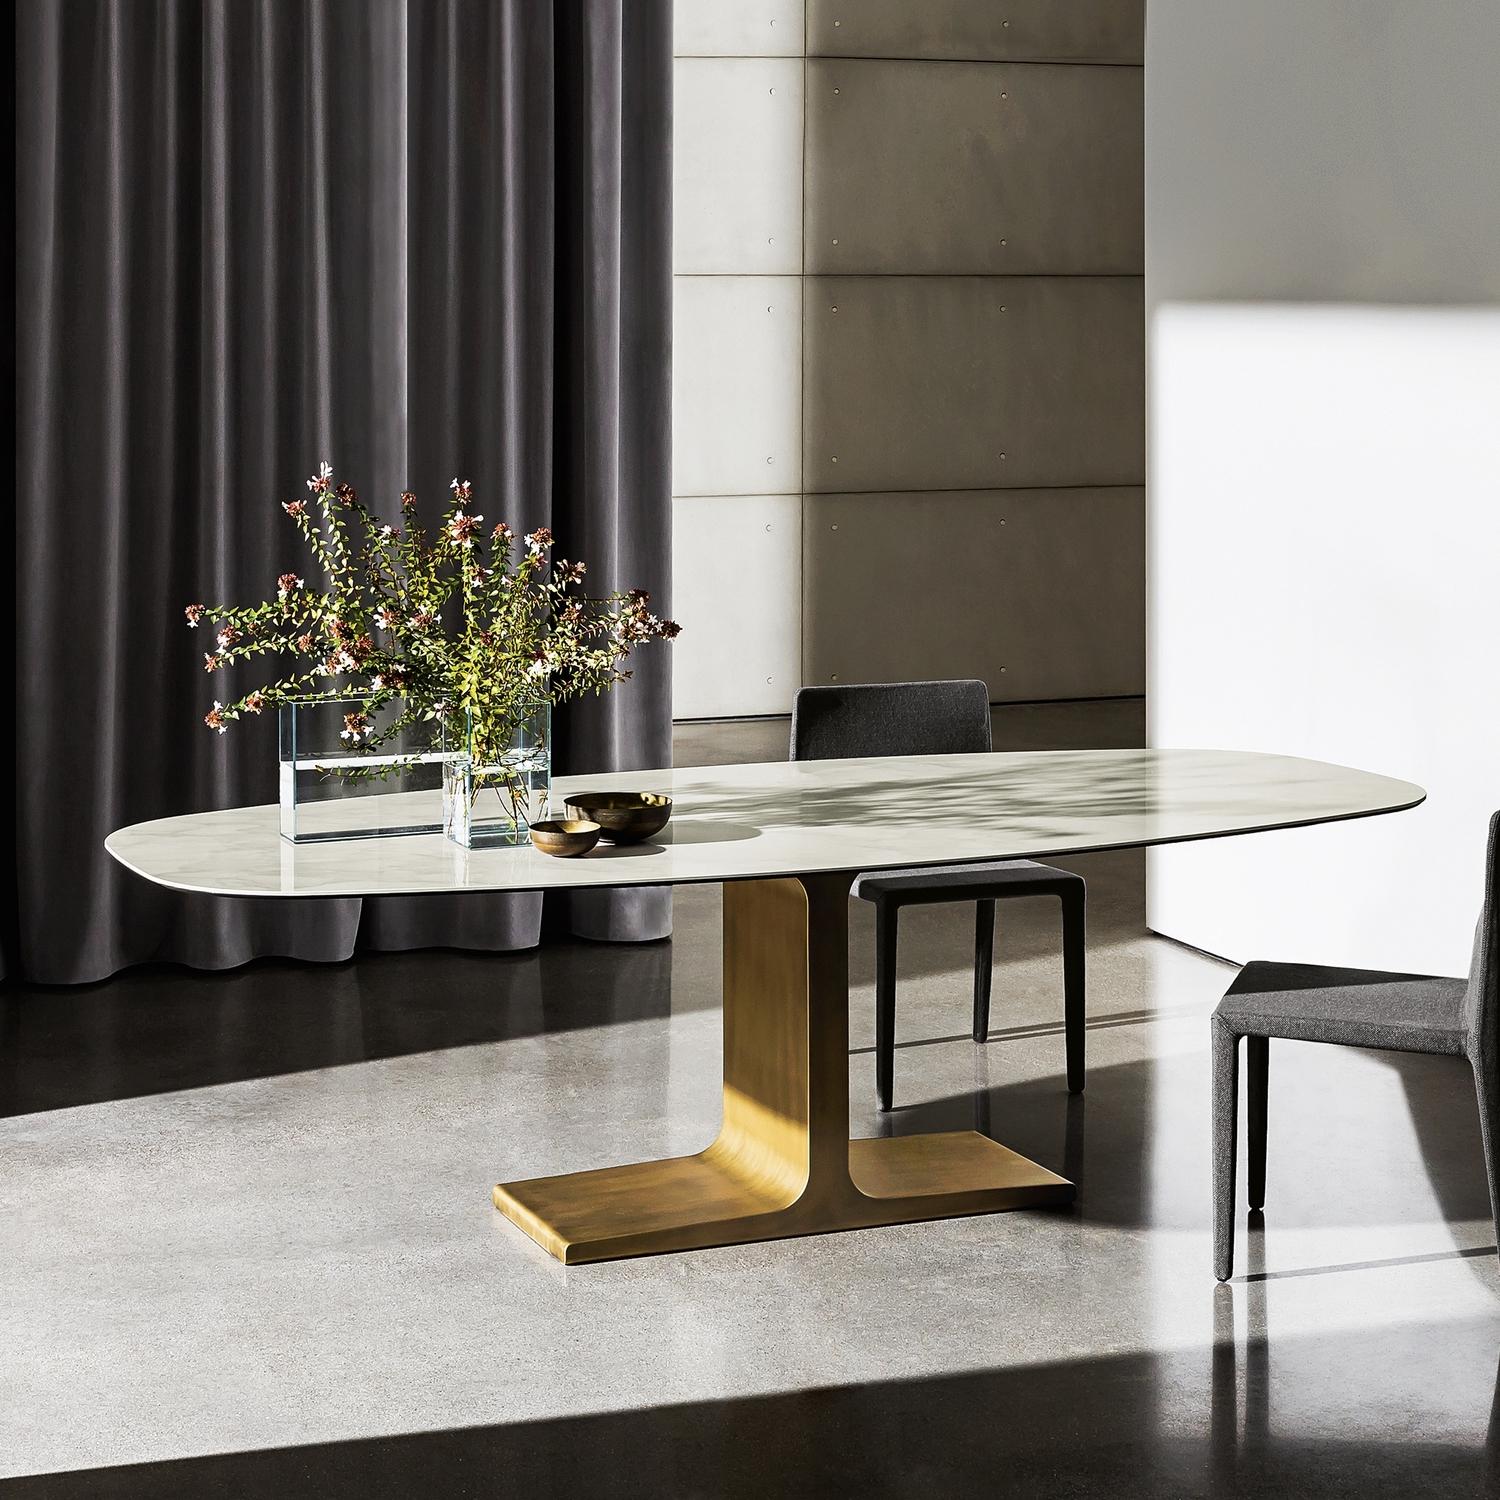 Modern Brass/Ceramic Dining Table by Lievore Altherr, In stock in Los Angeles